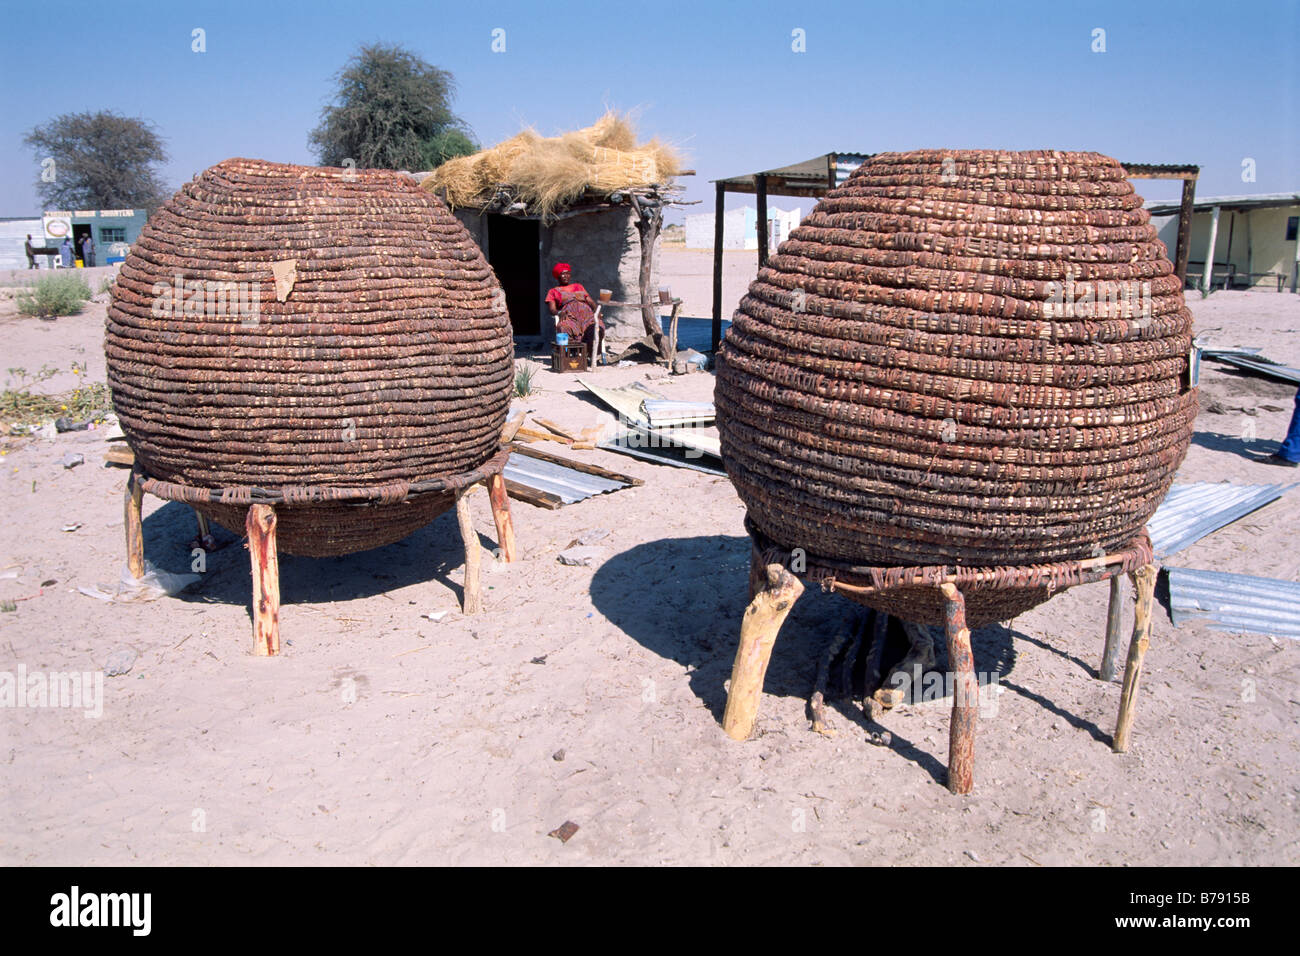 Baskets for storage of grains, Wamob woman behind, Ovamboland, Namibia, Africa Stock Photo